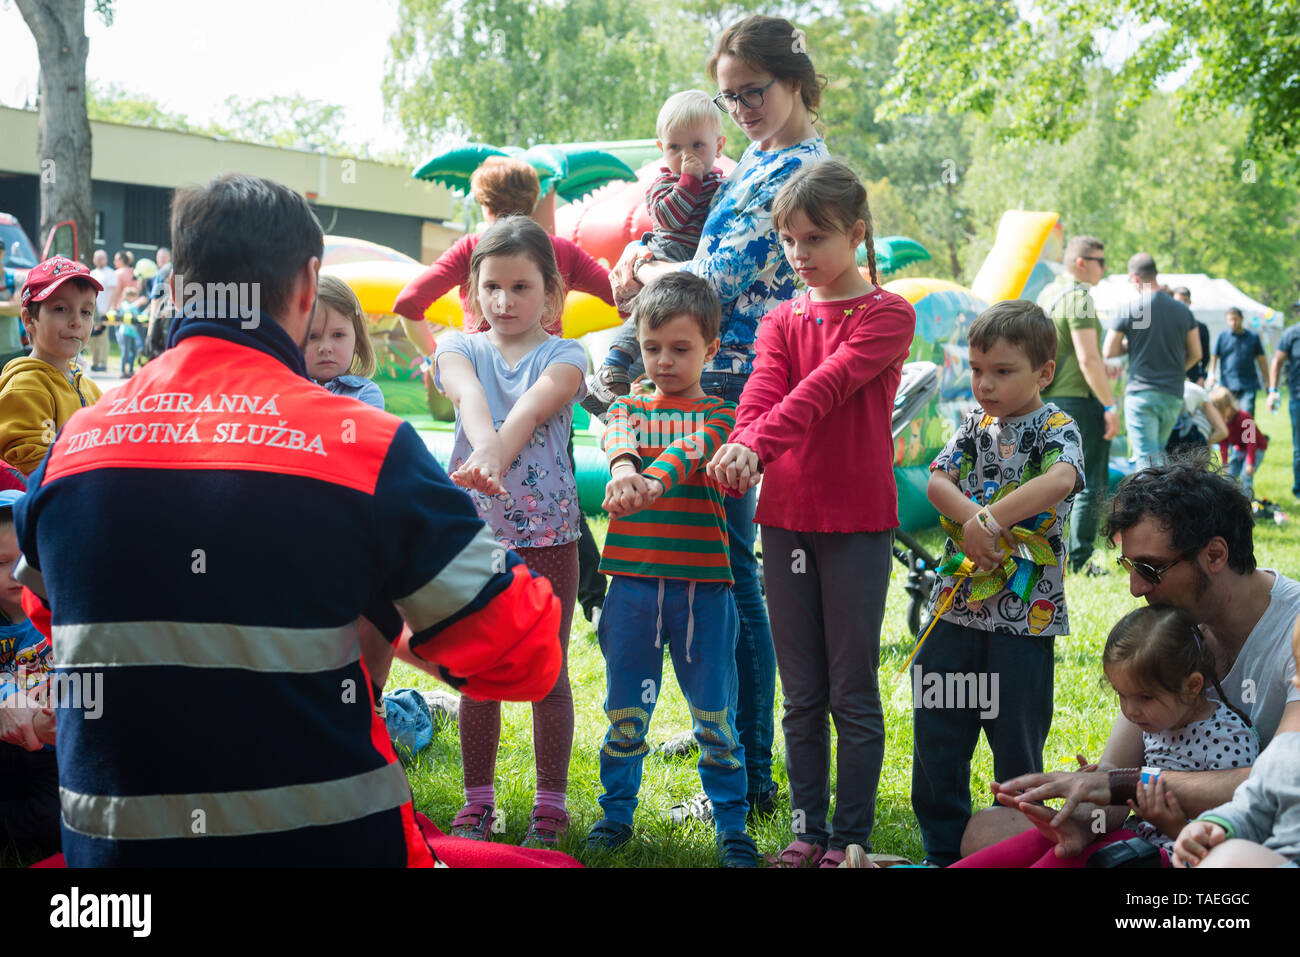 BRATISLAVA, SLOVAKIA - MAY 18, 2019: Male rescuer demonstrating CPR to kids with an emergency dummy in Bratislava, Slovakia Stock Photo